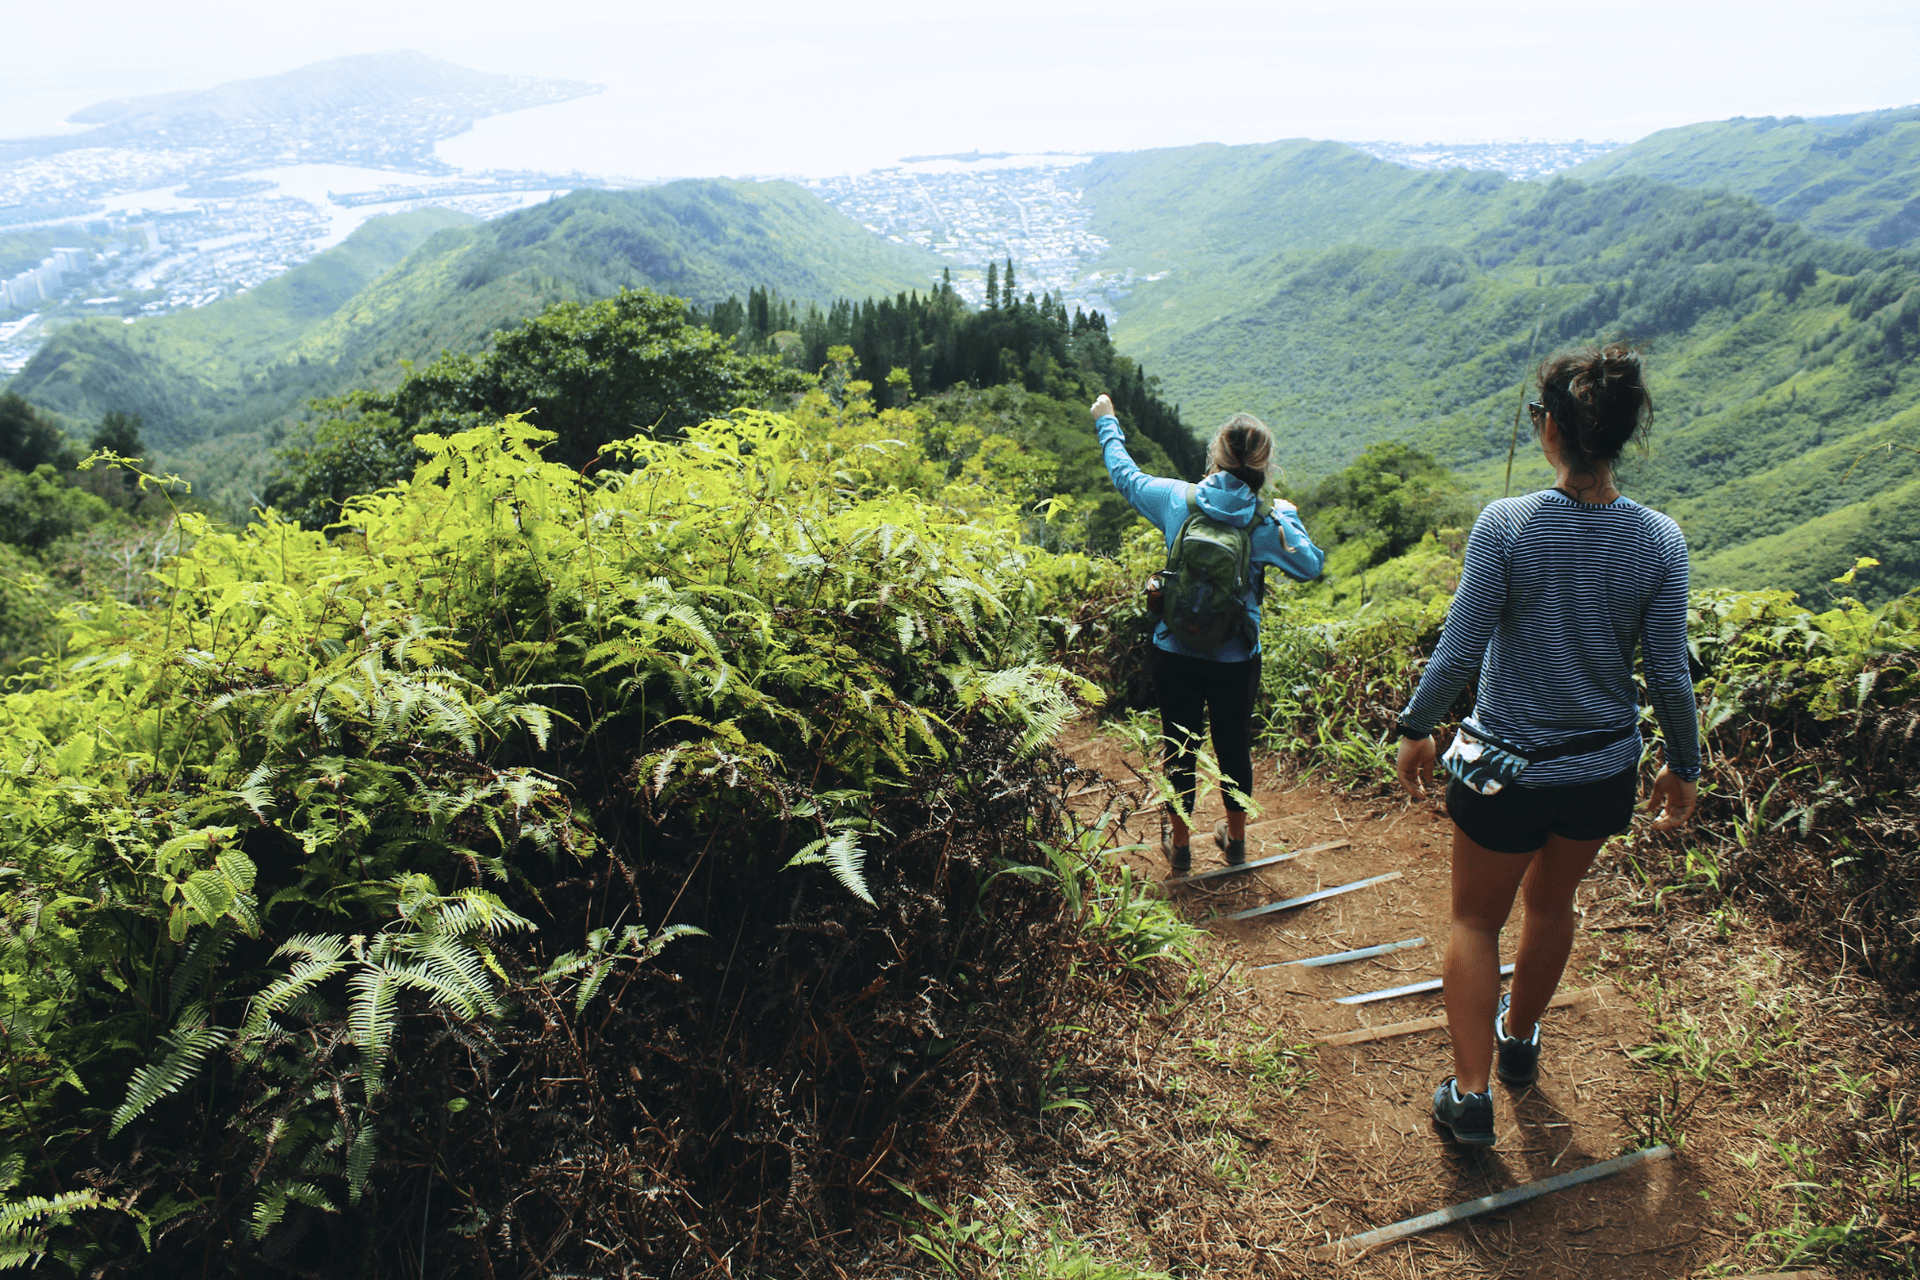 Thanks to Drew Farwell for this snap of hikers on the Wiliwilinui trail. This is one of our favourite ridge hikes on Oahu.